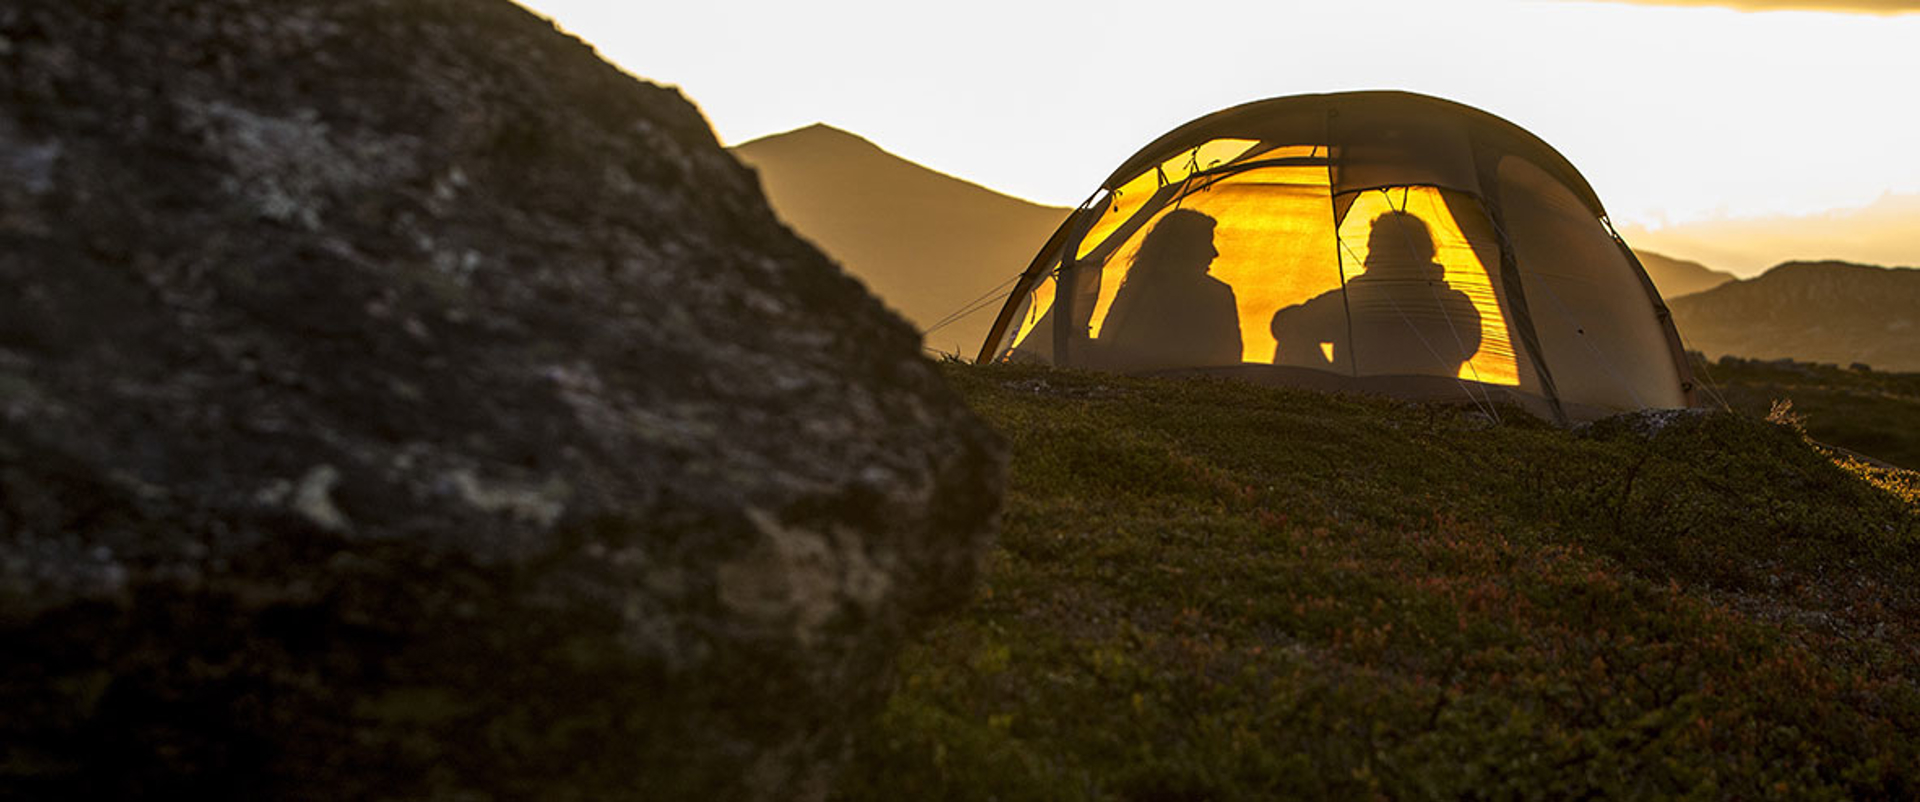 Silhouette of two people inside a tent at sunset